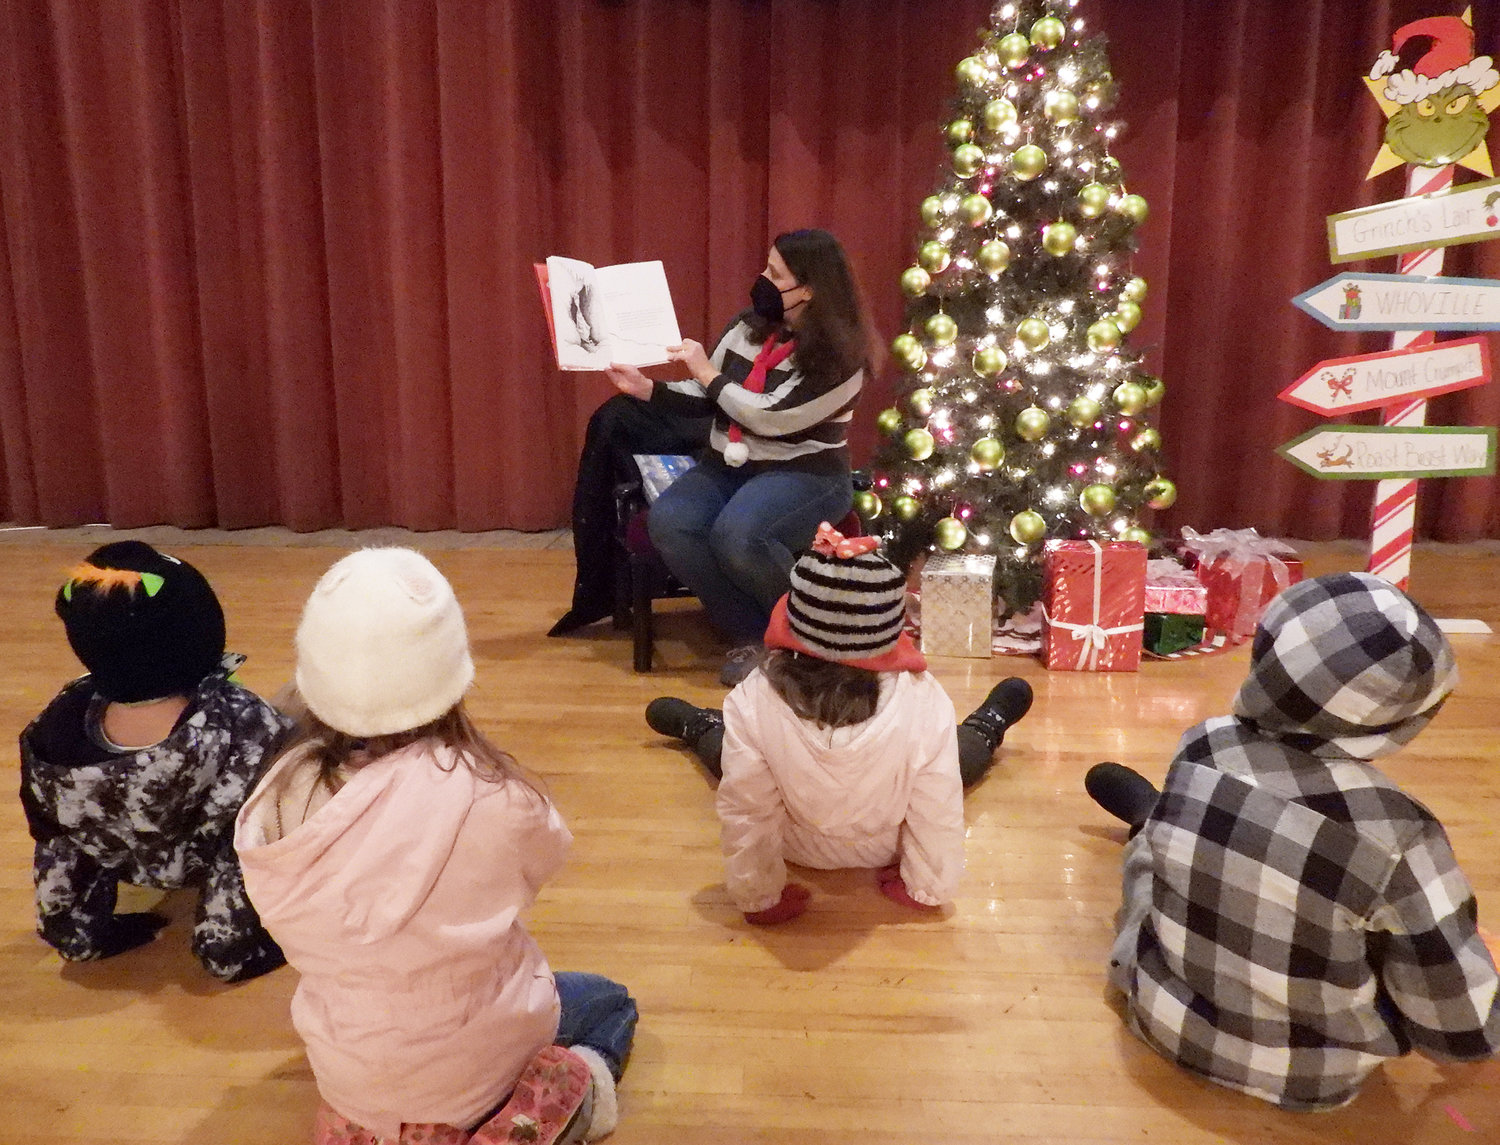 STORY TIME AT THE KALLET — Youth Coordinator Megan Gillander of the Oneida Public Library reads Dr. Seuss's "How the Grinch Stole Christmas" and other holiday stories at the Kallet Civic Center. For more photos of the Oneida Christmas Festival, visit the Rome Sentinel website.